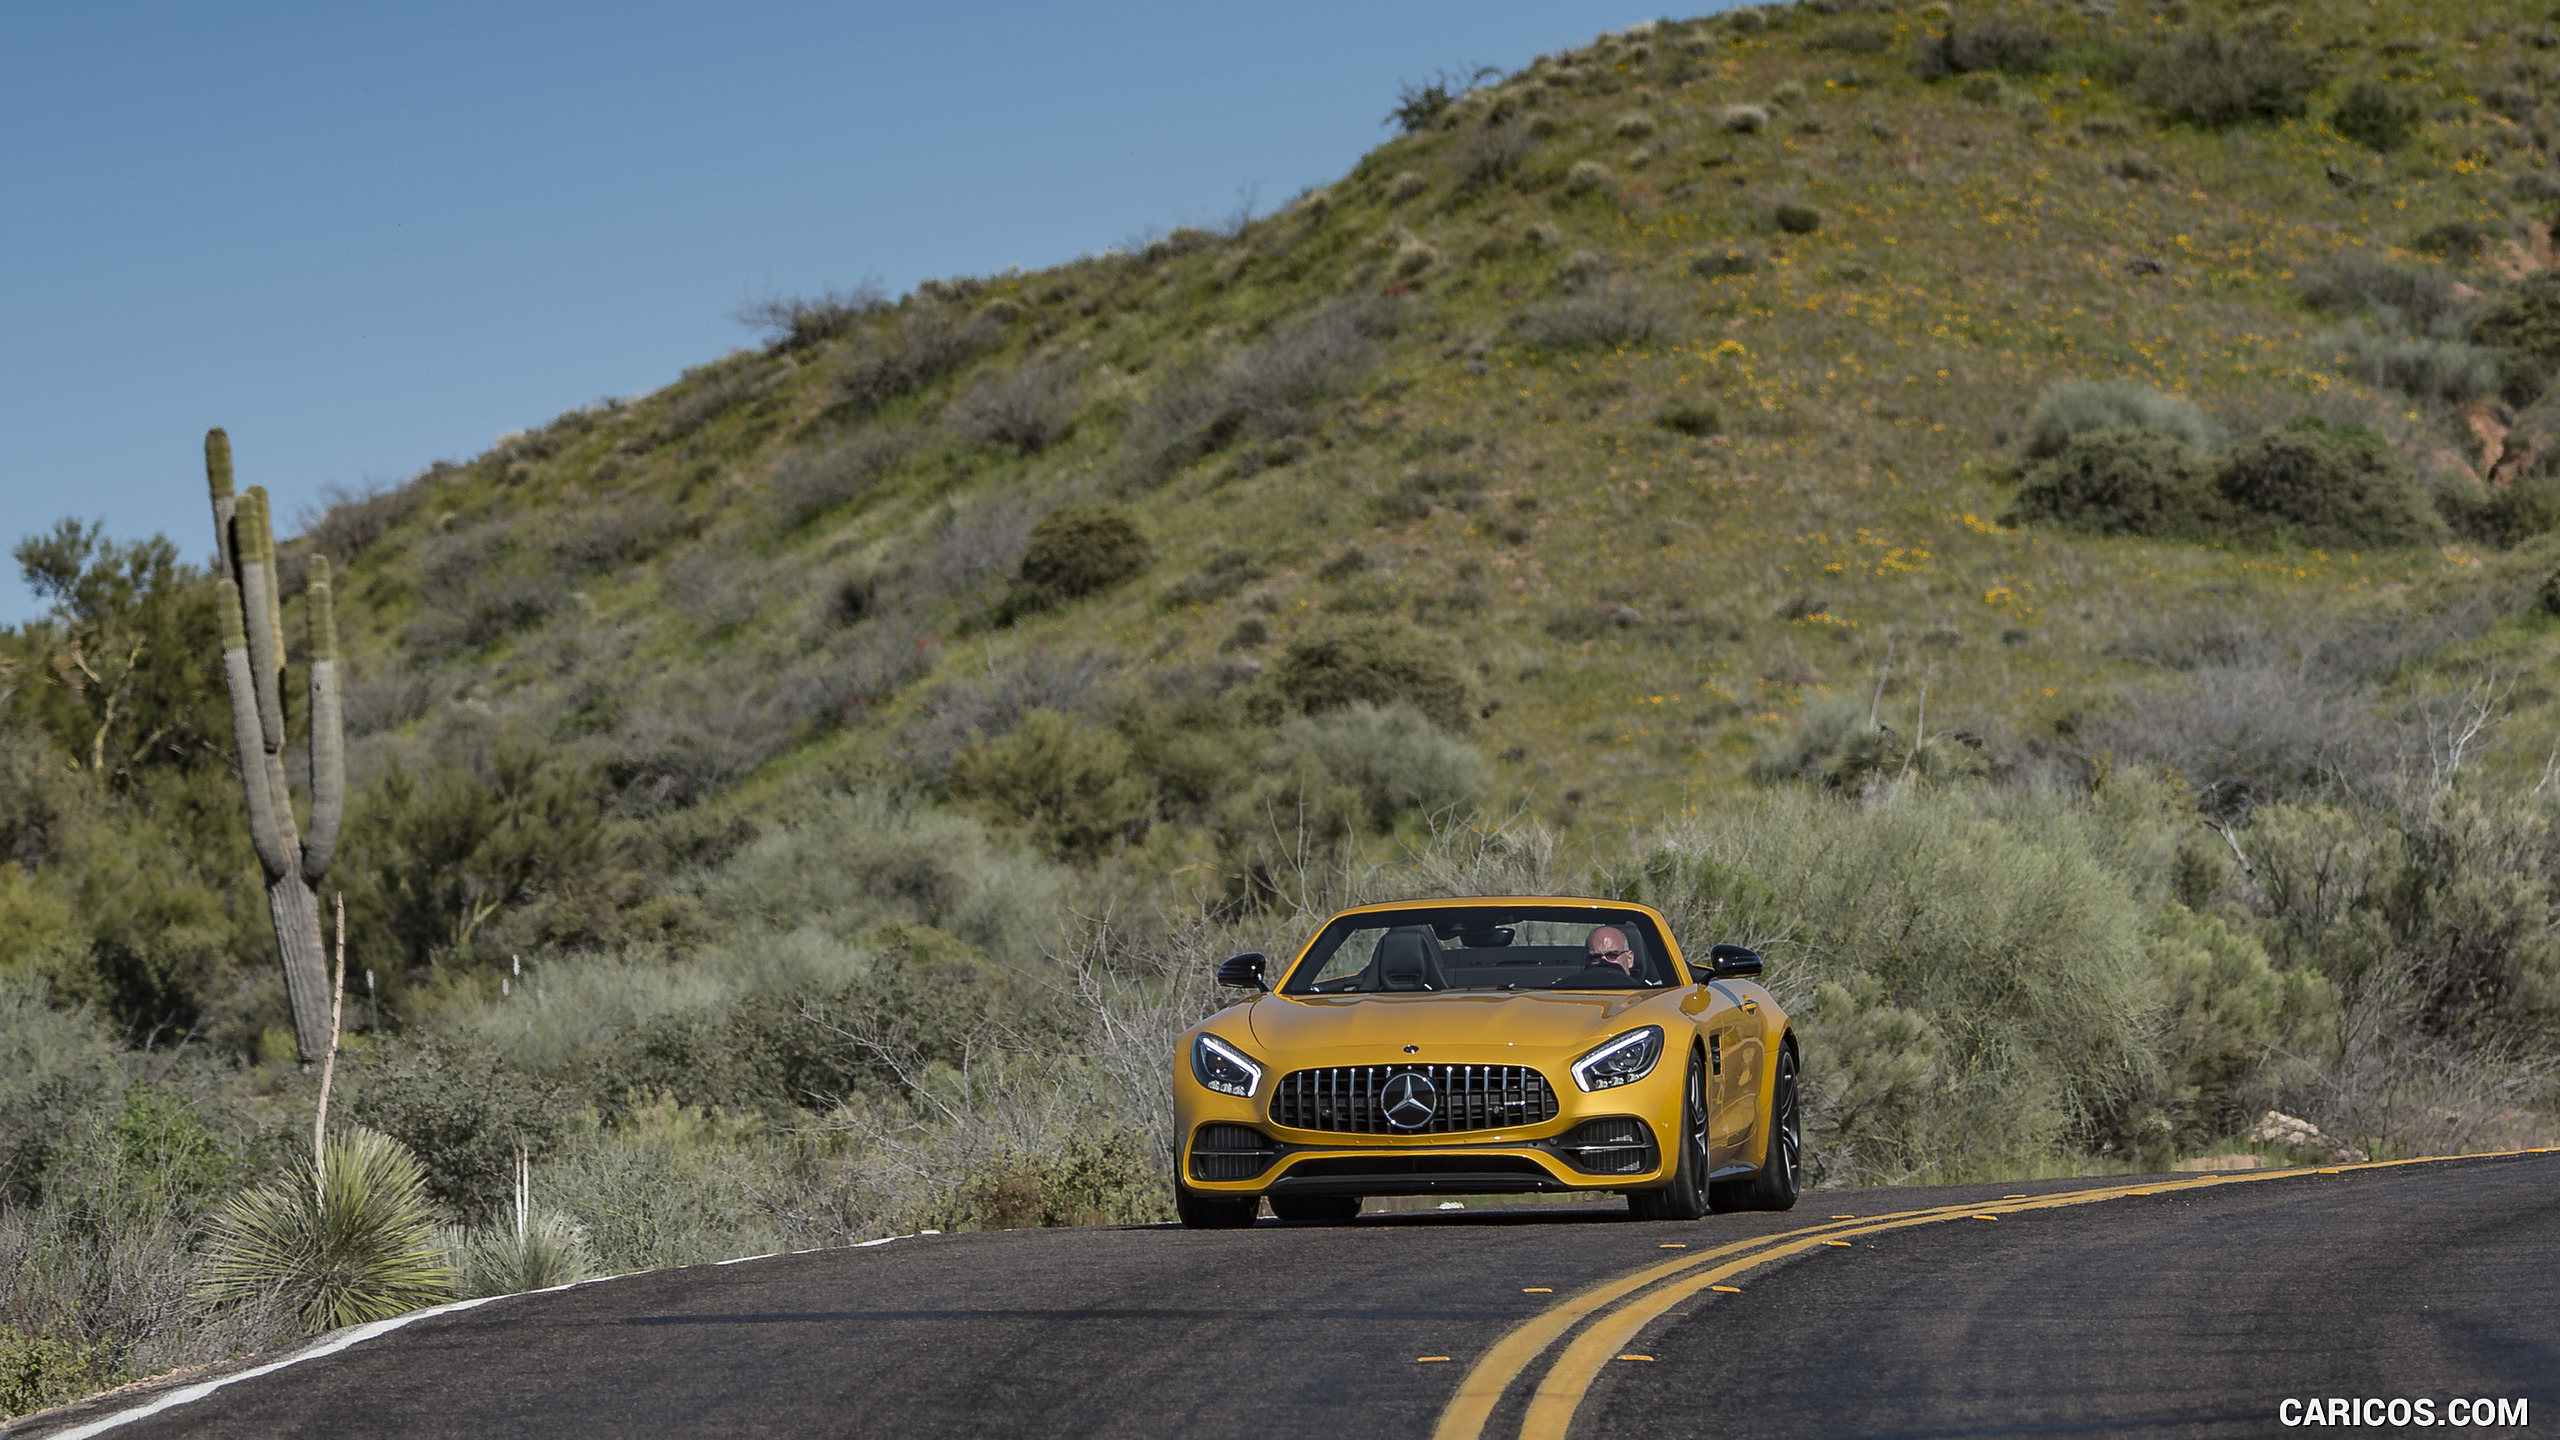 2018 Mercedes-AMG GT C Roadster - Front, #228 of 350